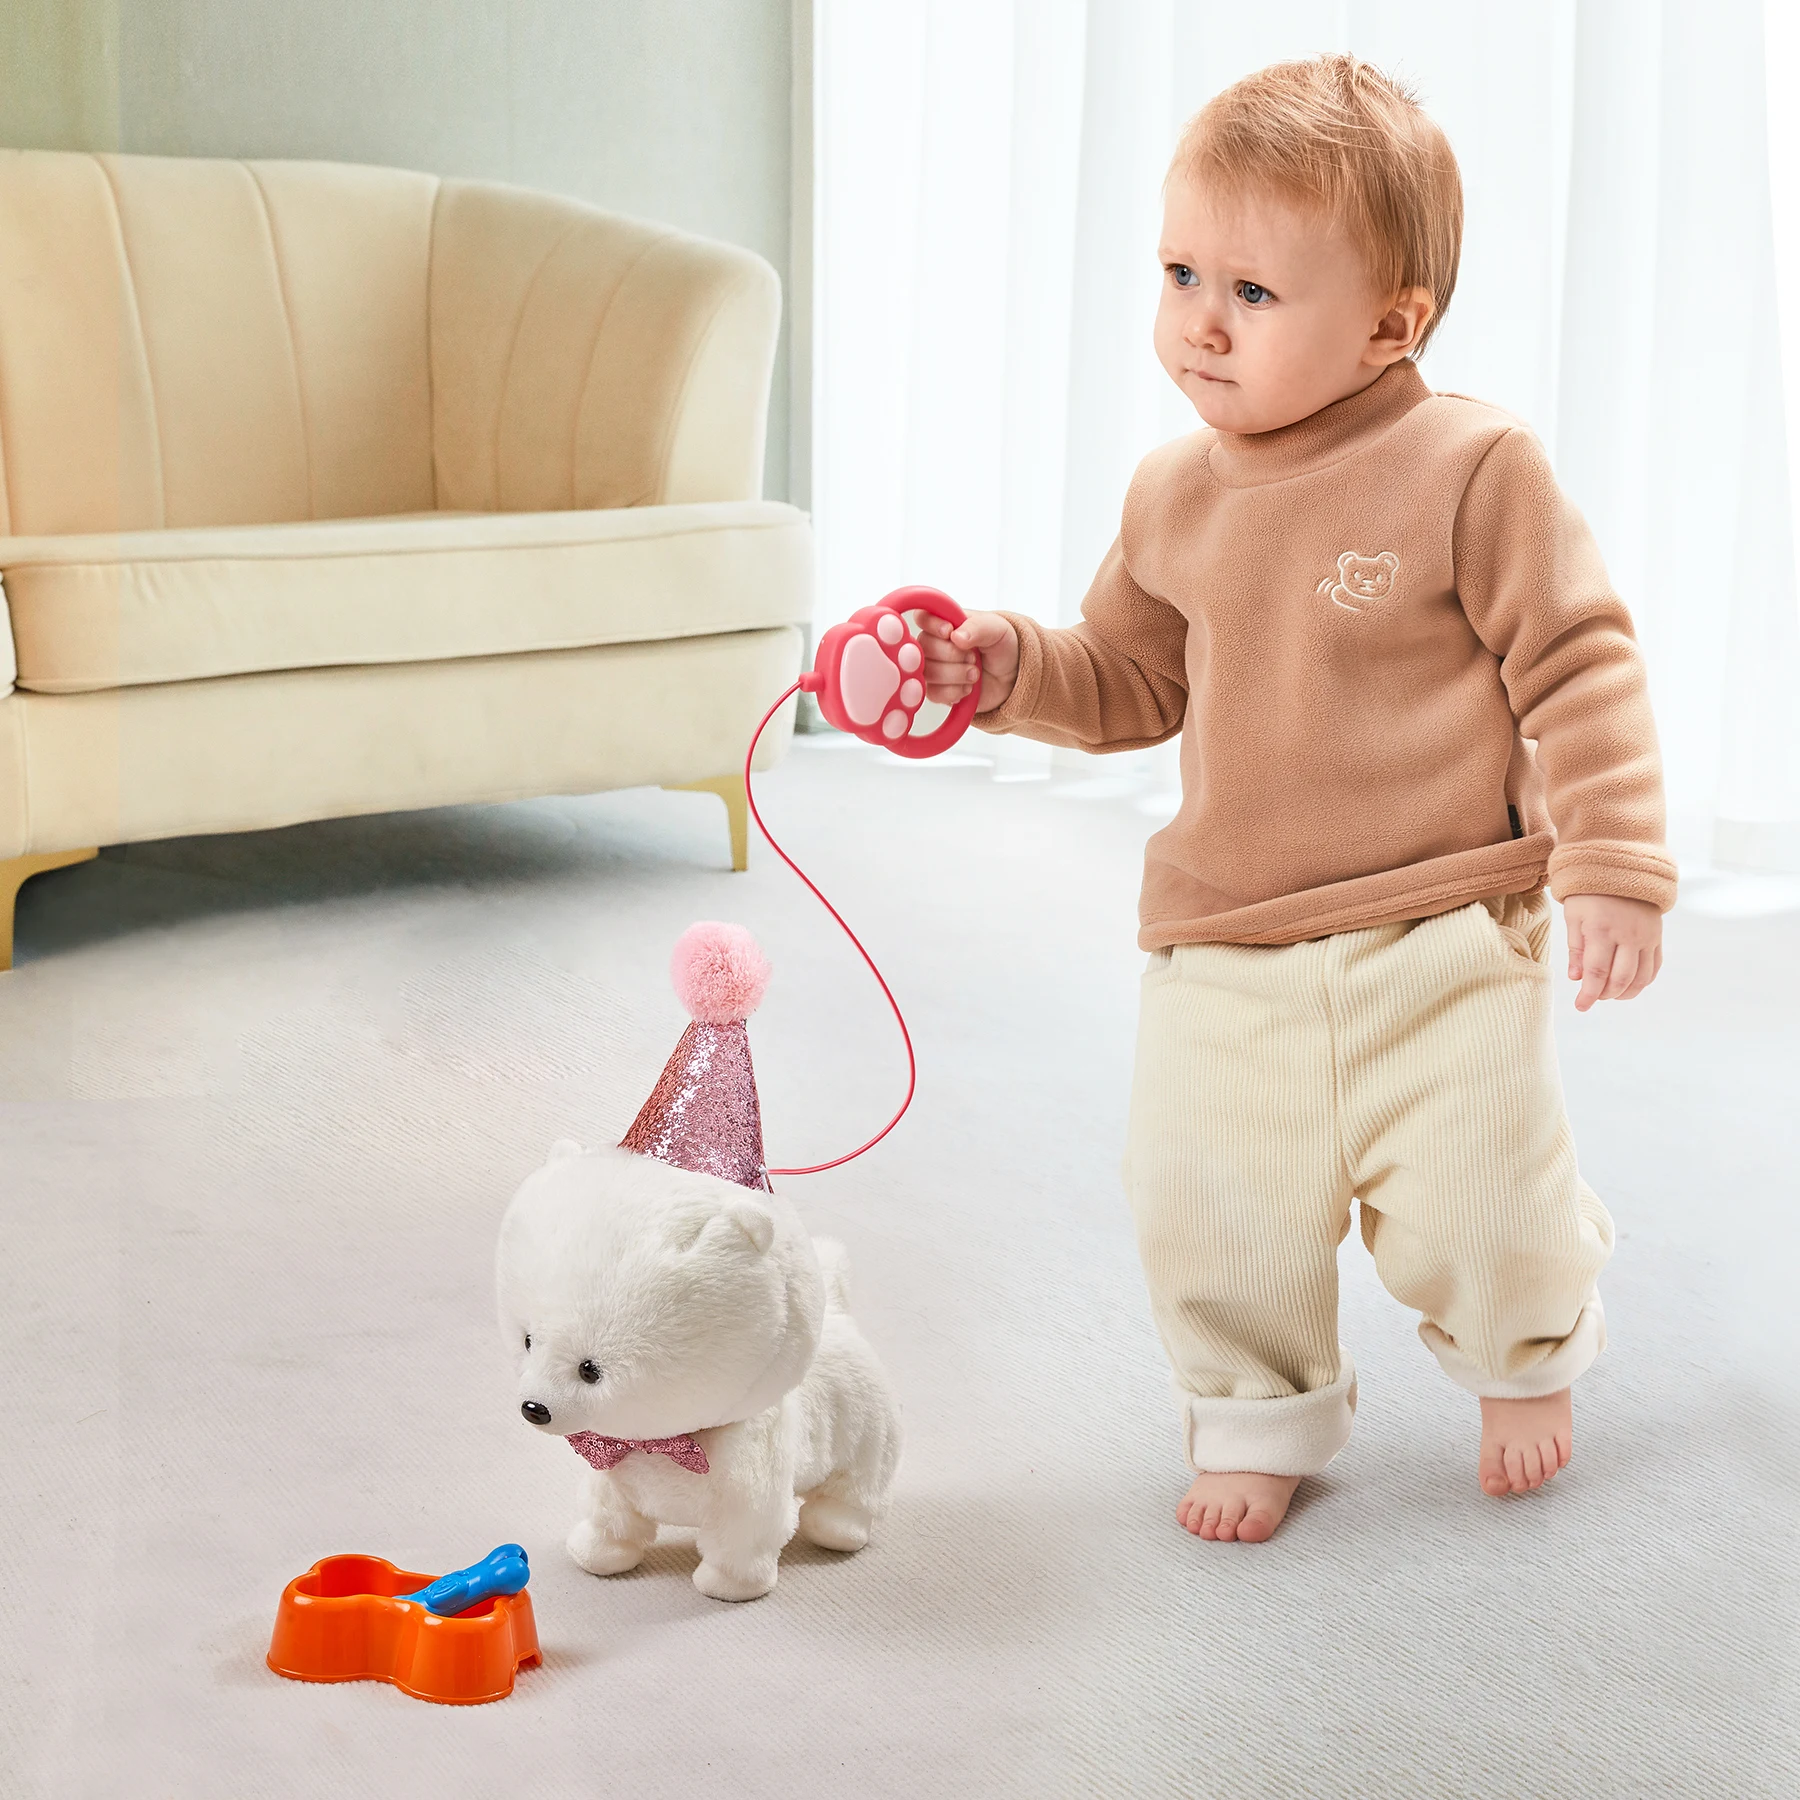 Tumama Kids Electric Puppy Toy Remote&Voice Control Barking Walking Plush Puppy Dog Toy set For Children